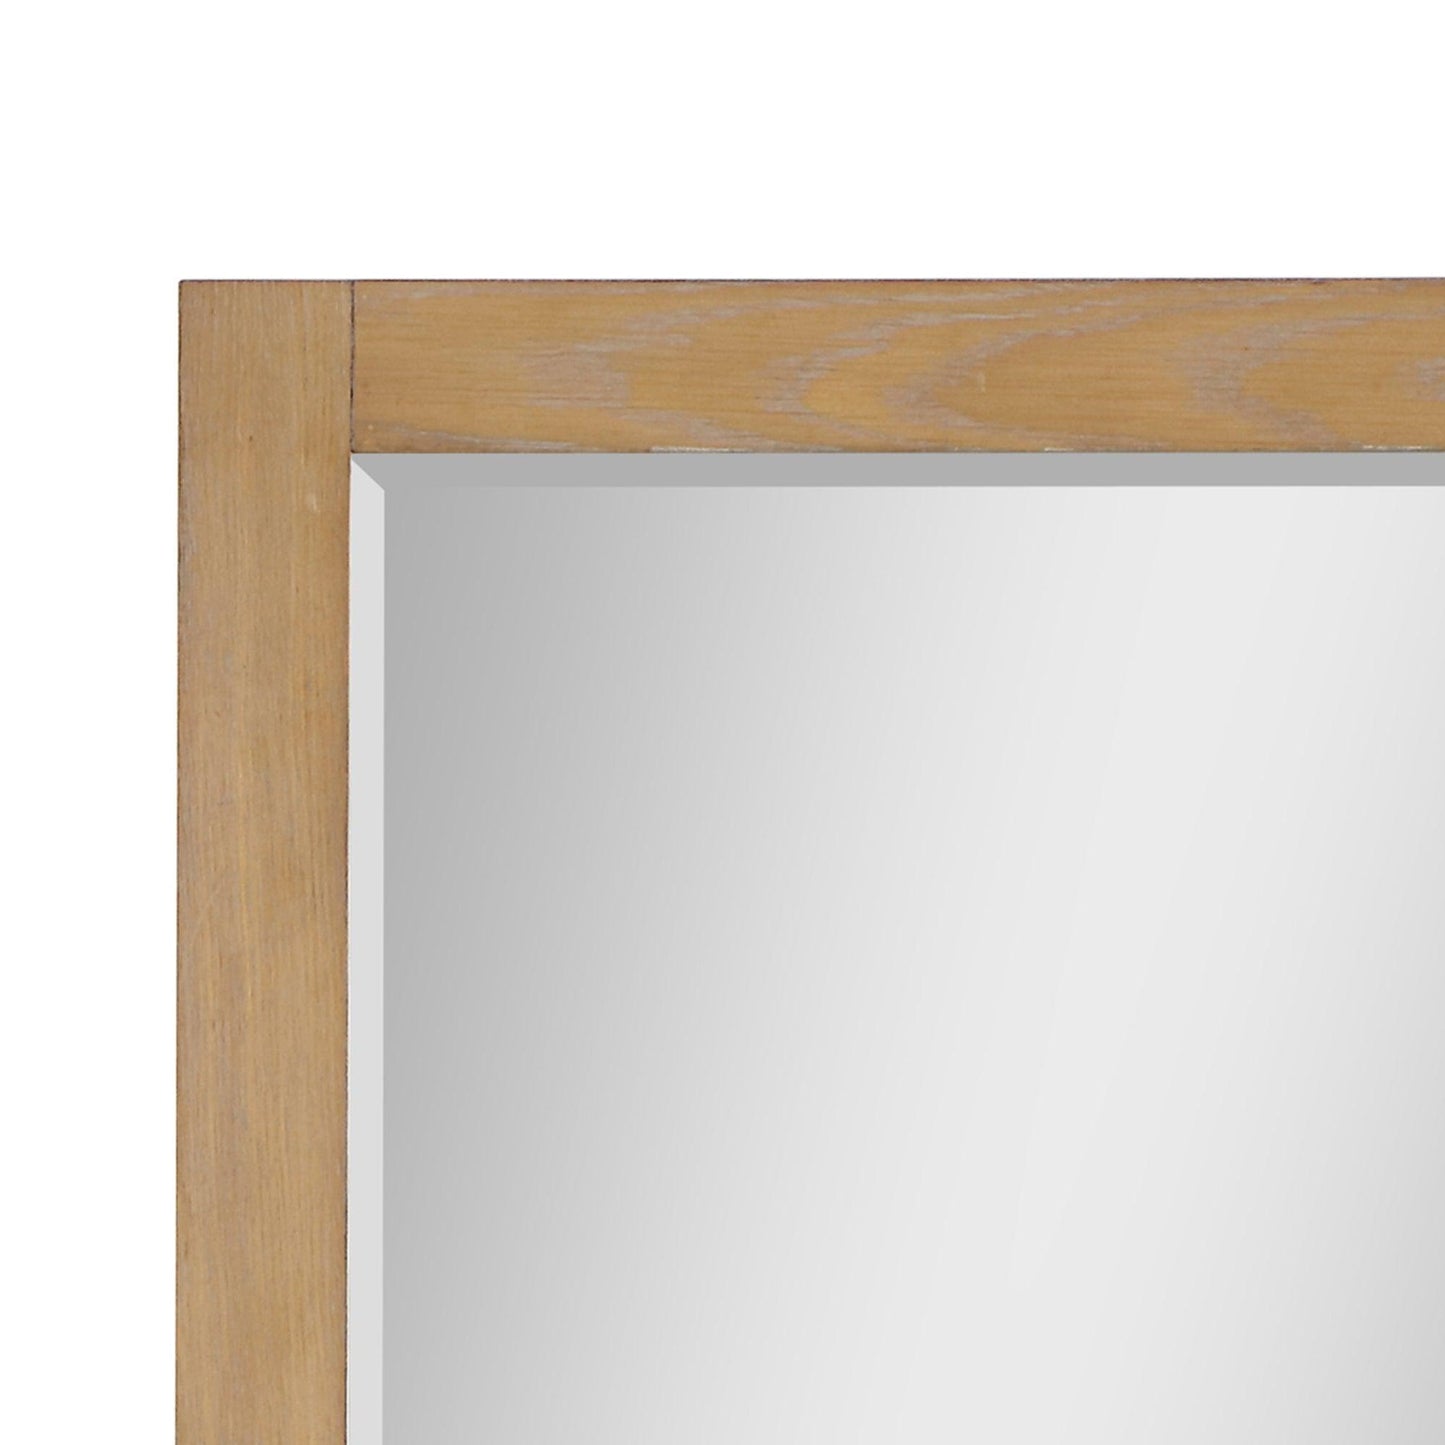 Altair Ivy 27" x 36" Rectangle Washed Oak Wood Framed Wall-Mounted Mirror